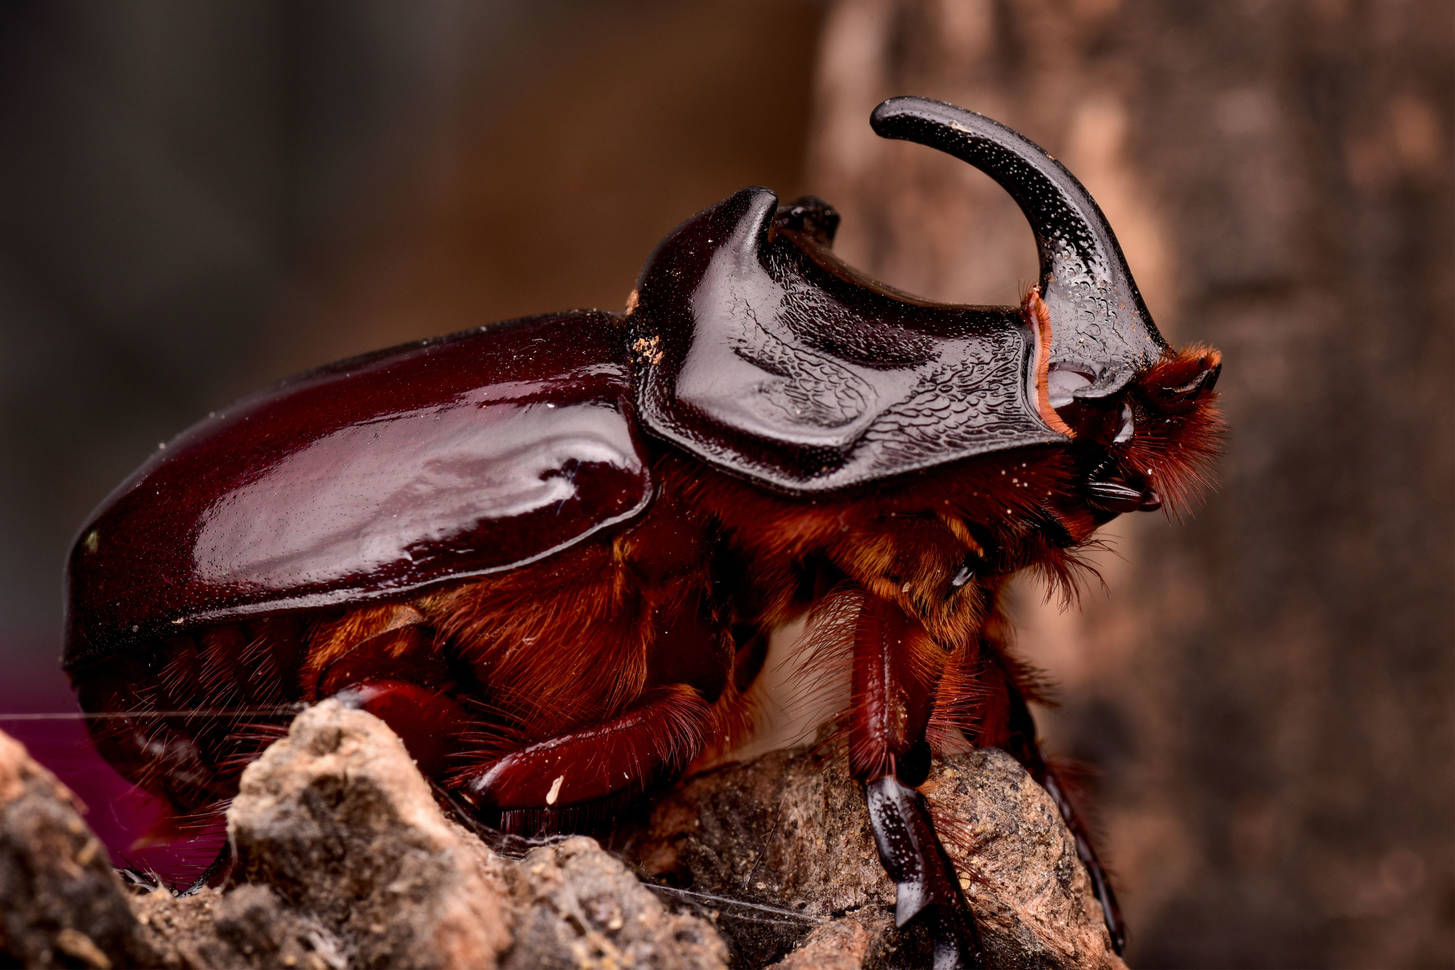 The rhinoceros beetle only lives for up to 16 months